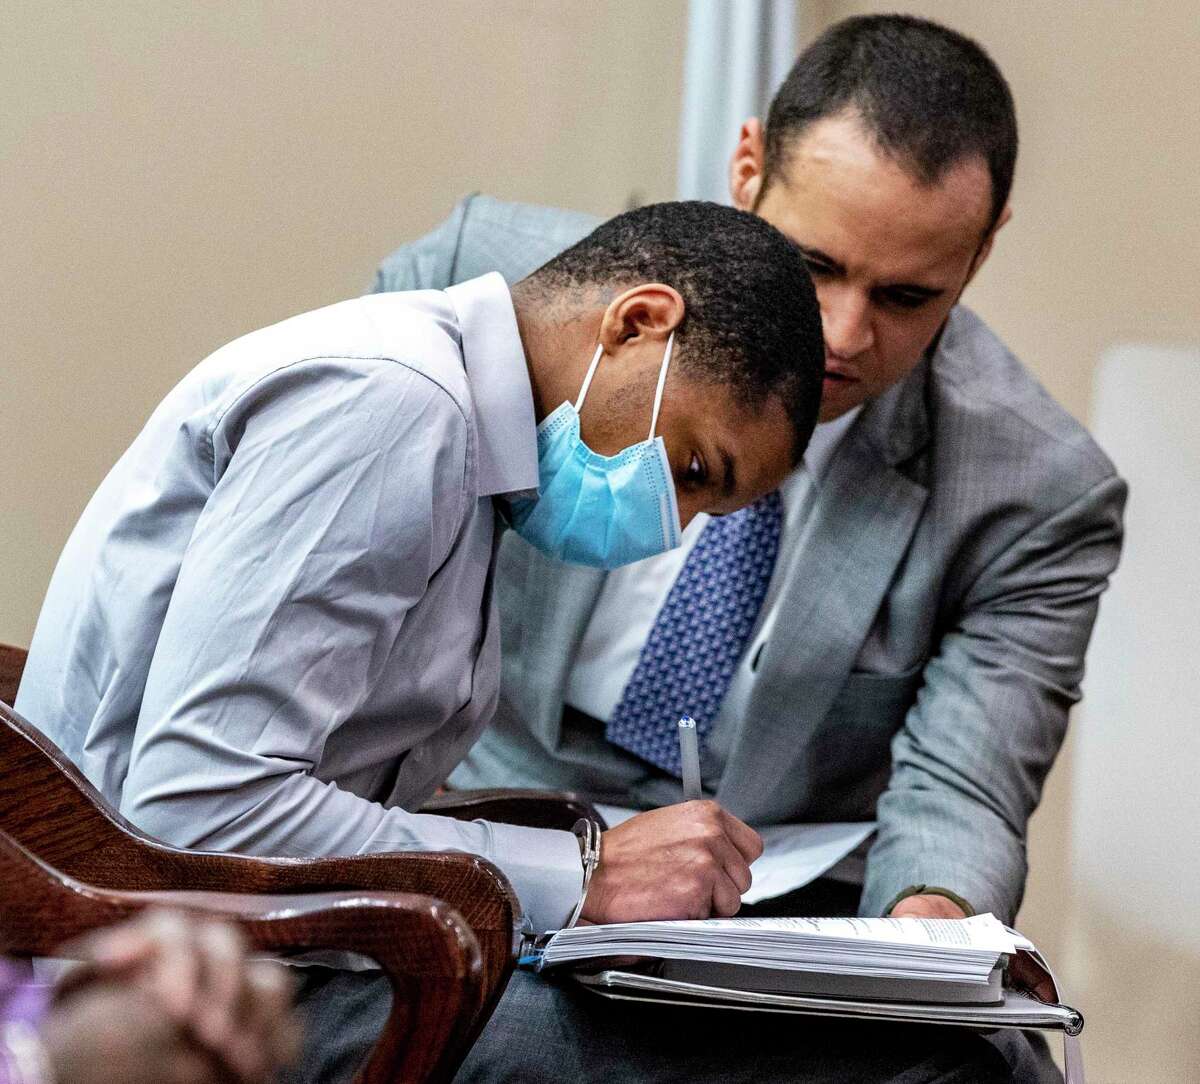 Known as the ‘Medical Center rapist’ for his previous conviction, Anton Harris, left, signs paperwork Tuesday with his attorney, Jonathan Watkins. Harris pleaded guilty to aggravated sexual assault and his sentencing Wednesday will resolve four remaining sex assault charges against him.